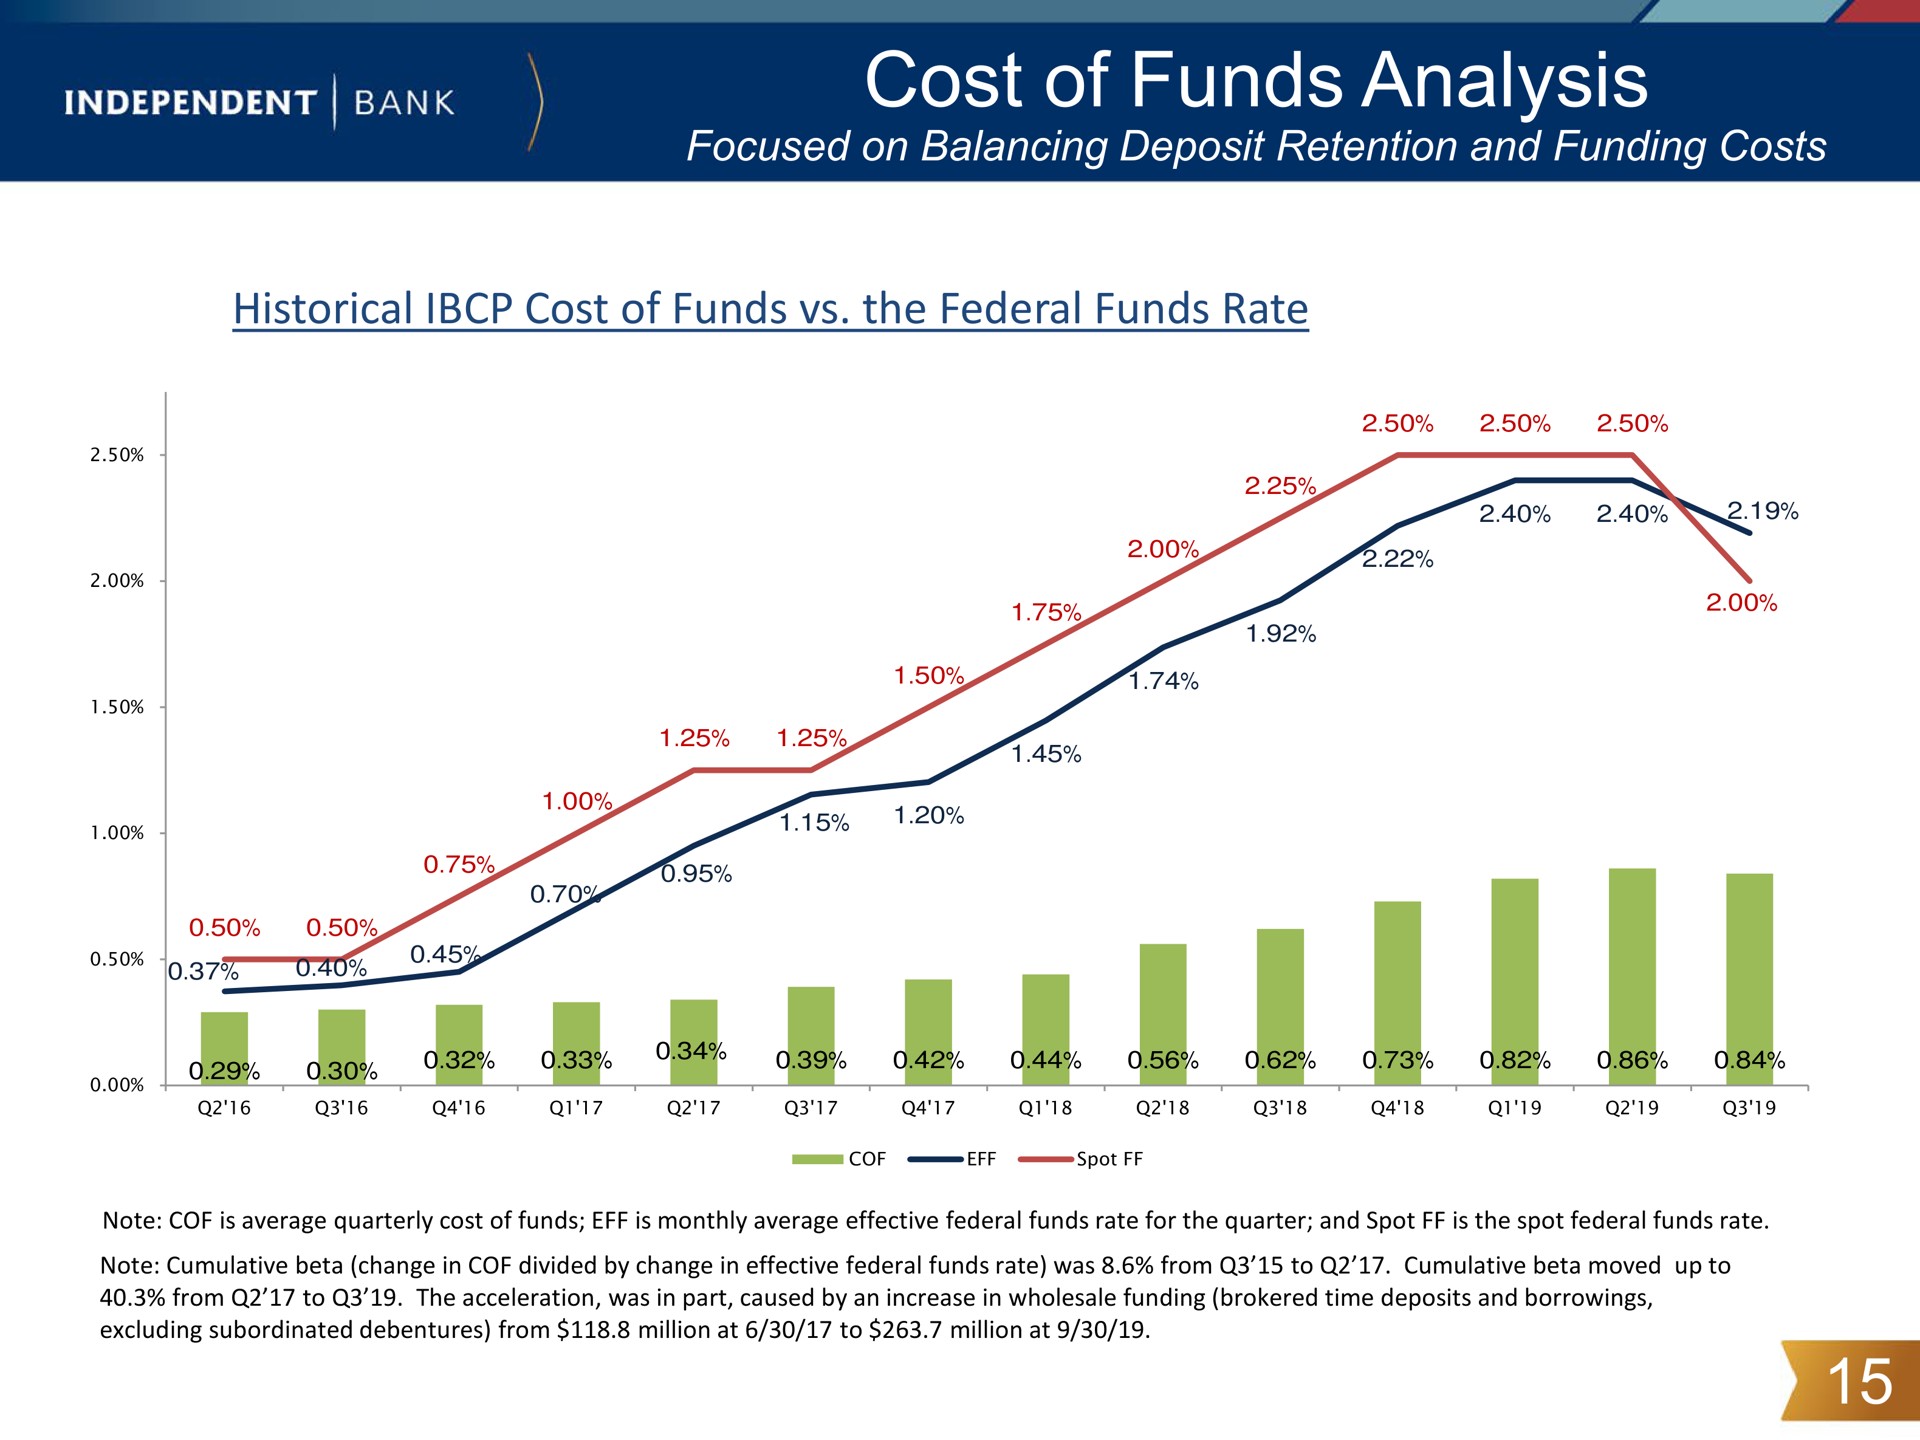 cost of funds analysis rear | Independent Bank Corp